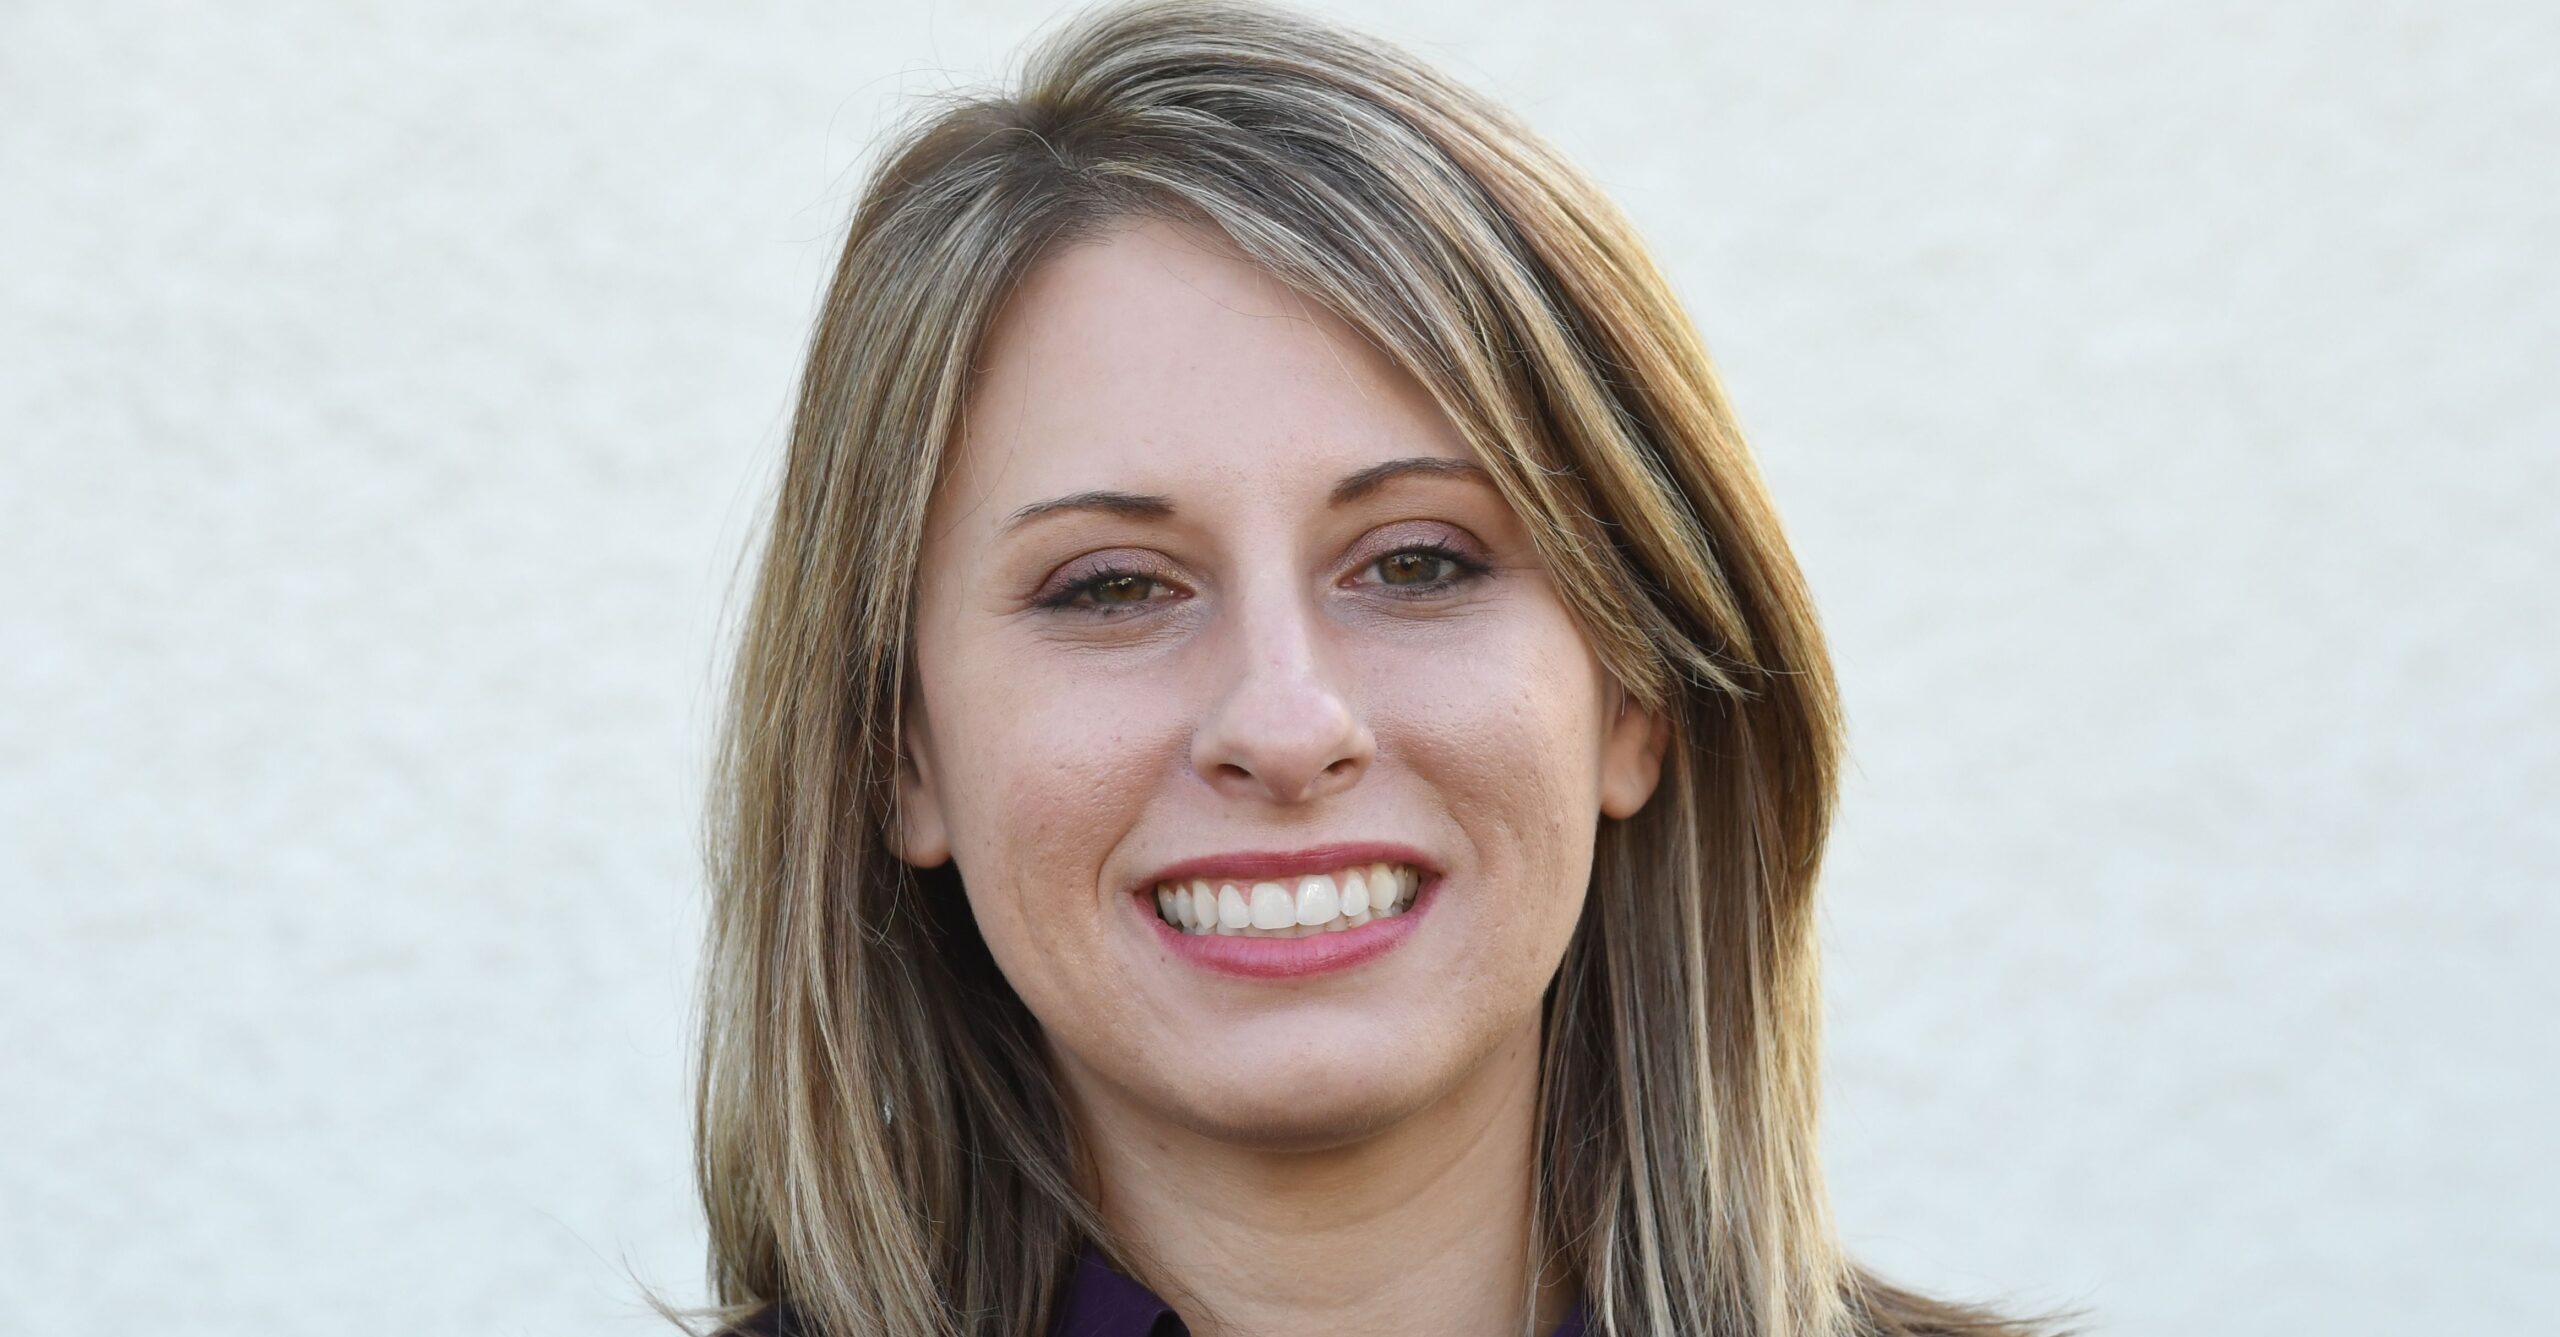 ‘A Judge Ruled That My Naked Body Was in the Public Interest’: Former Rep. Katie Hill Bankrupt After Revenge Porn Suit